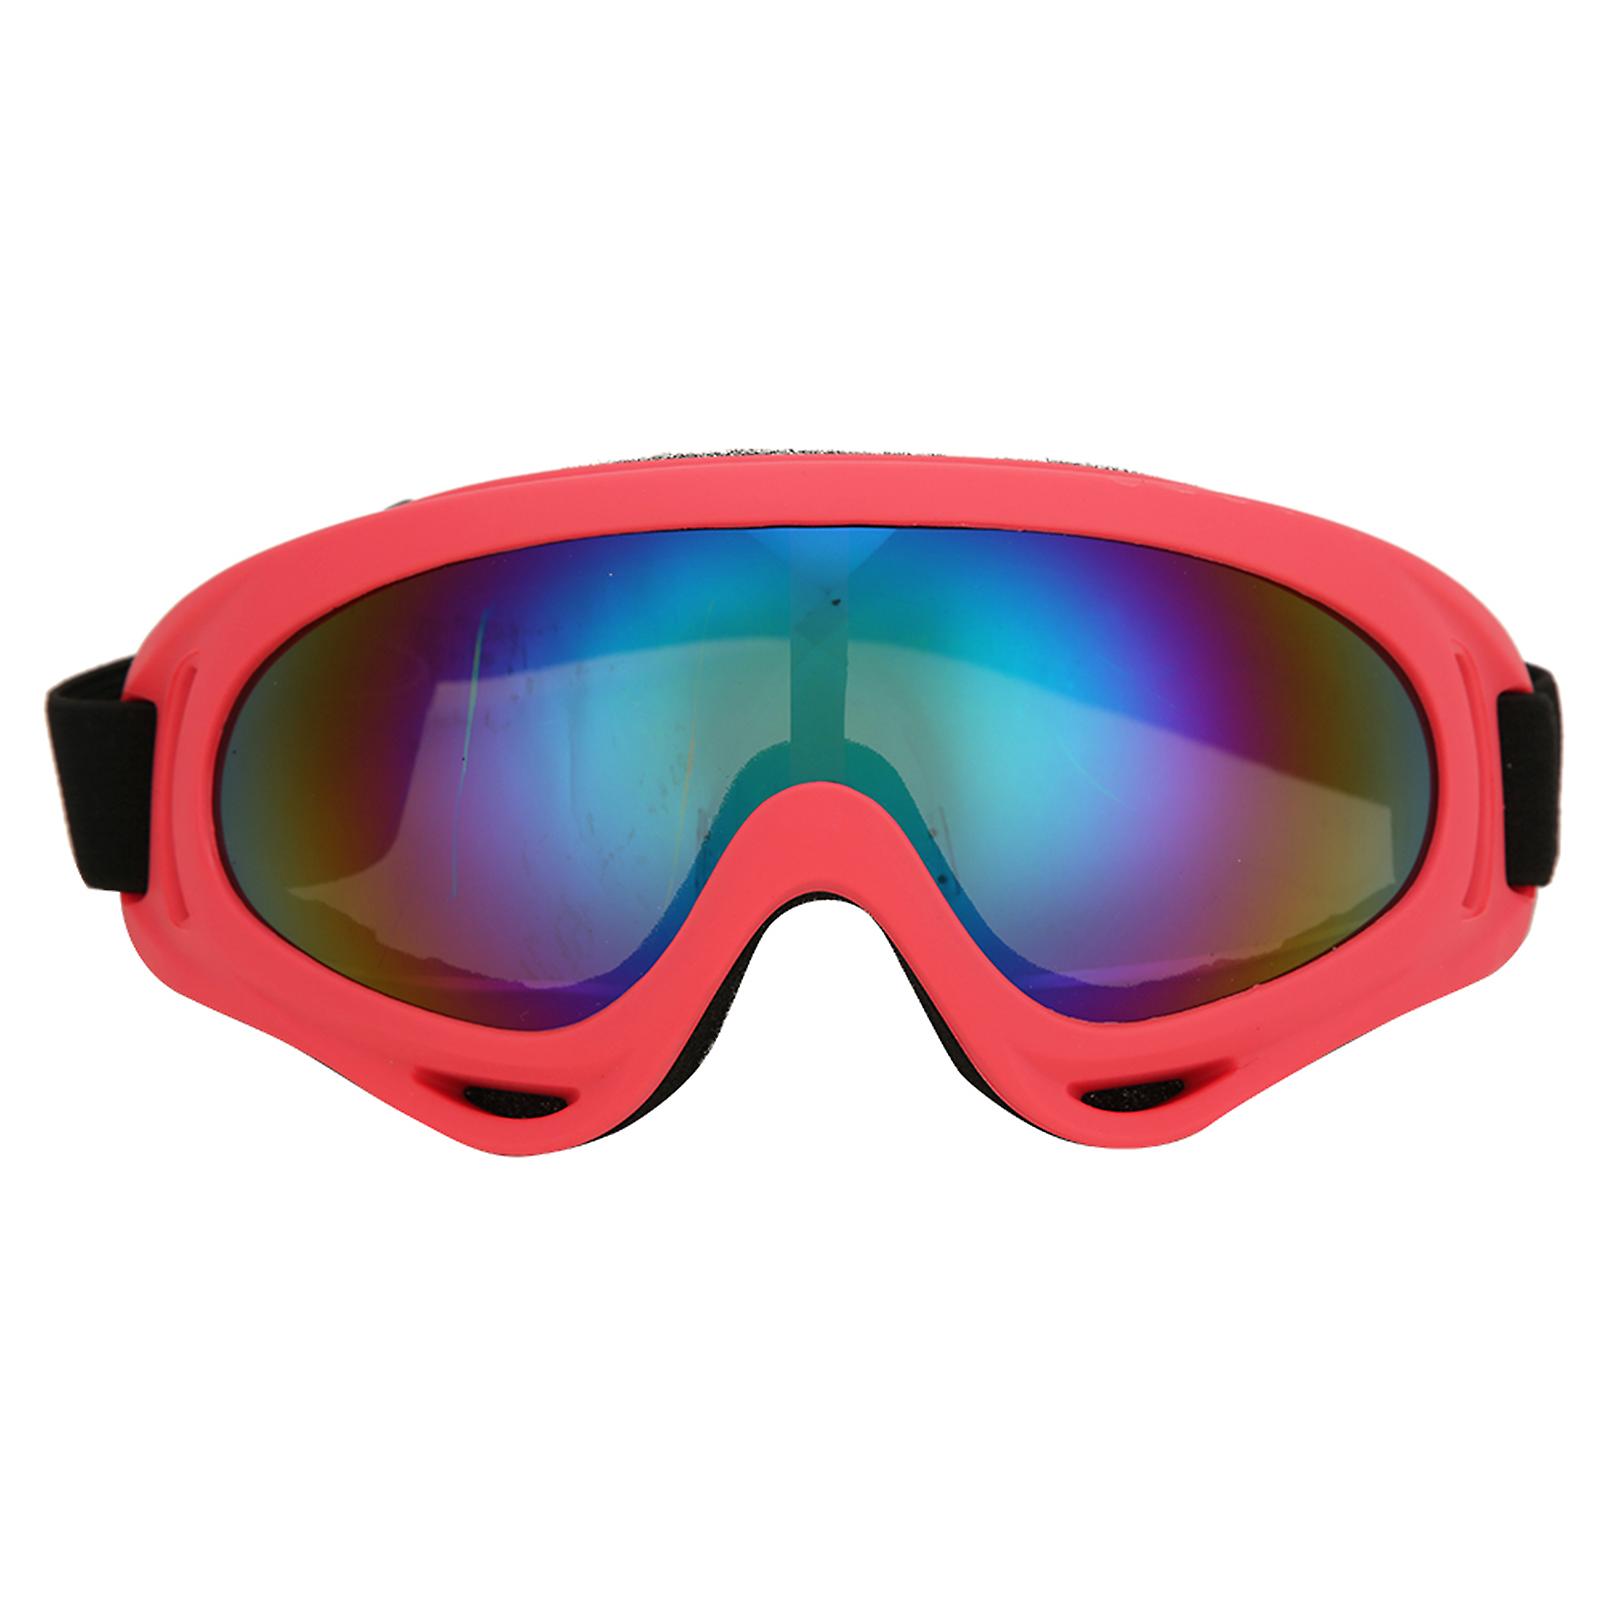 Pc Windproof Skiing Glasses Motorcycle Unisex Outdoor Sports Cycling Goggles For Adults Childrenred Frame Color Lens